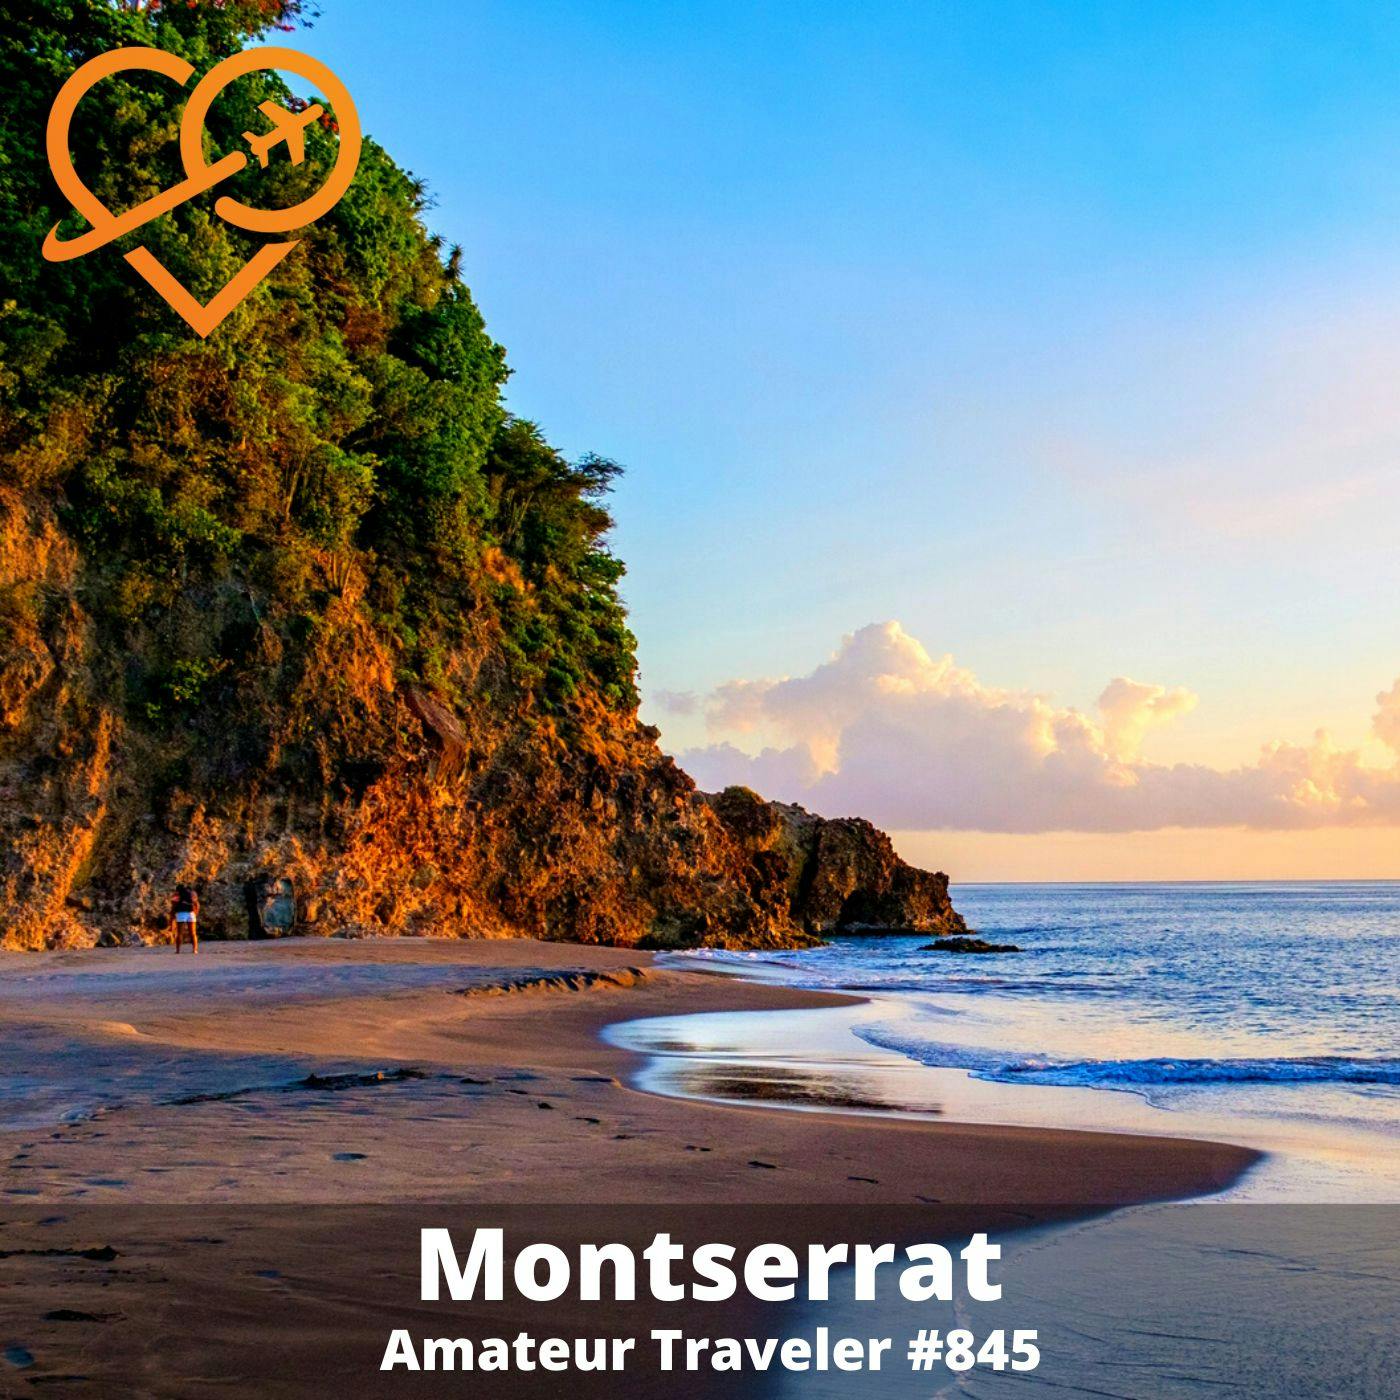 AT#845 - Travel to the Island of Montserrat